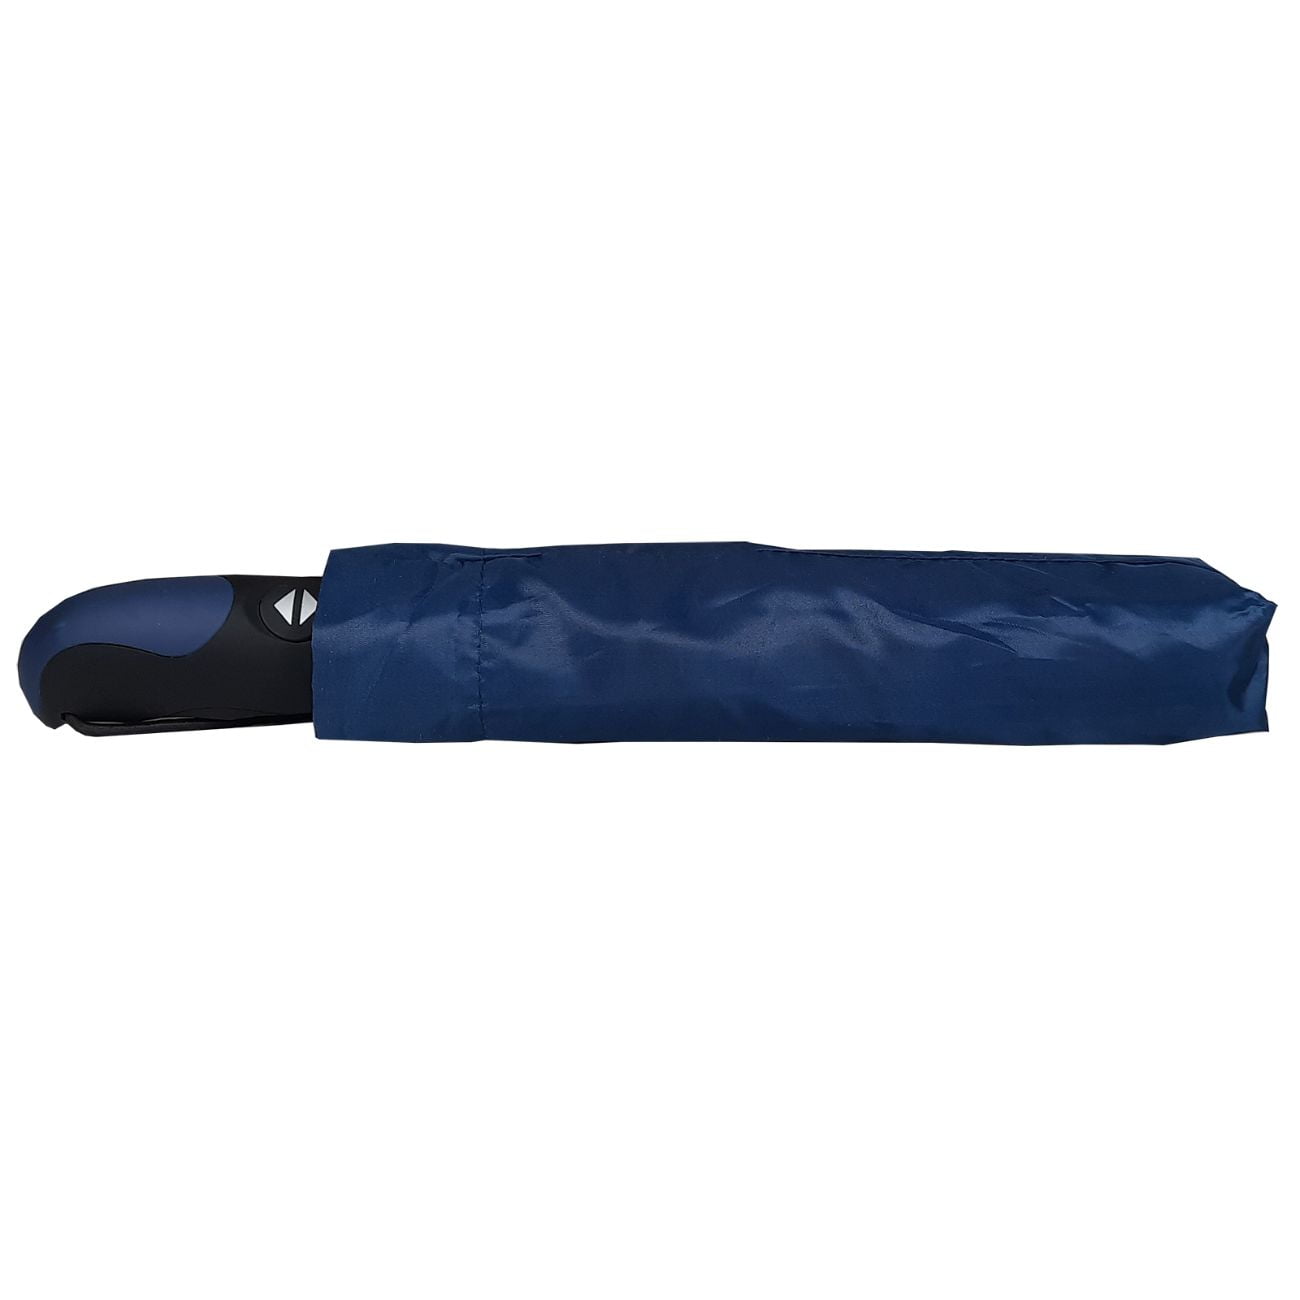 Automatic compact umbrella closed with the sleeve attached